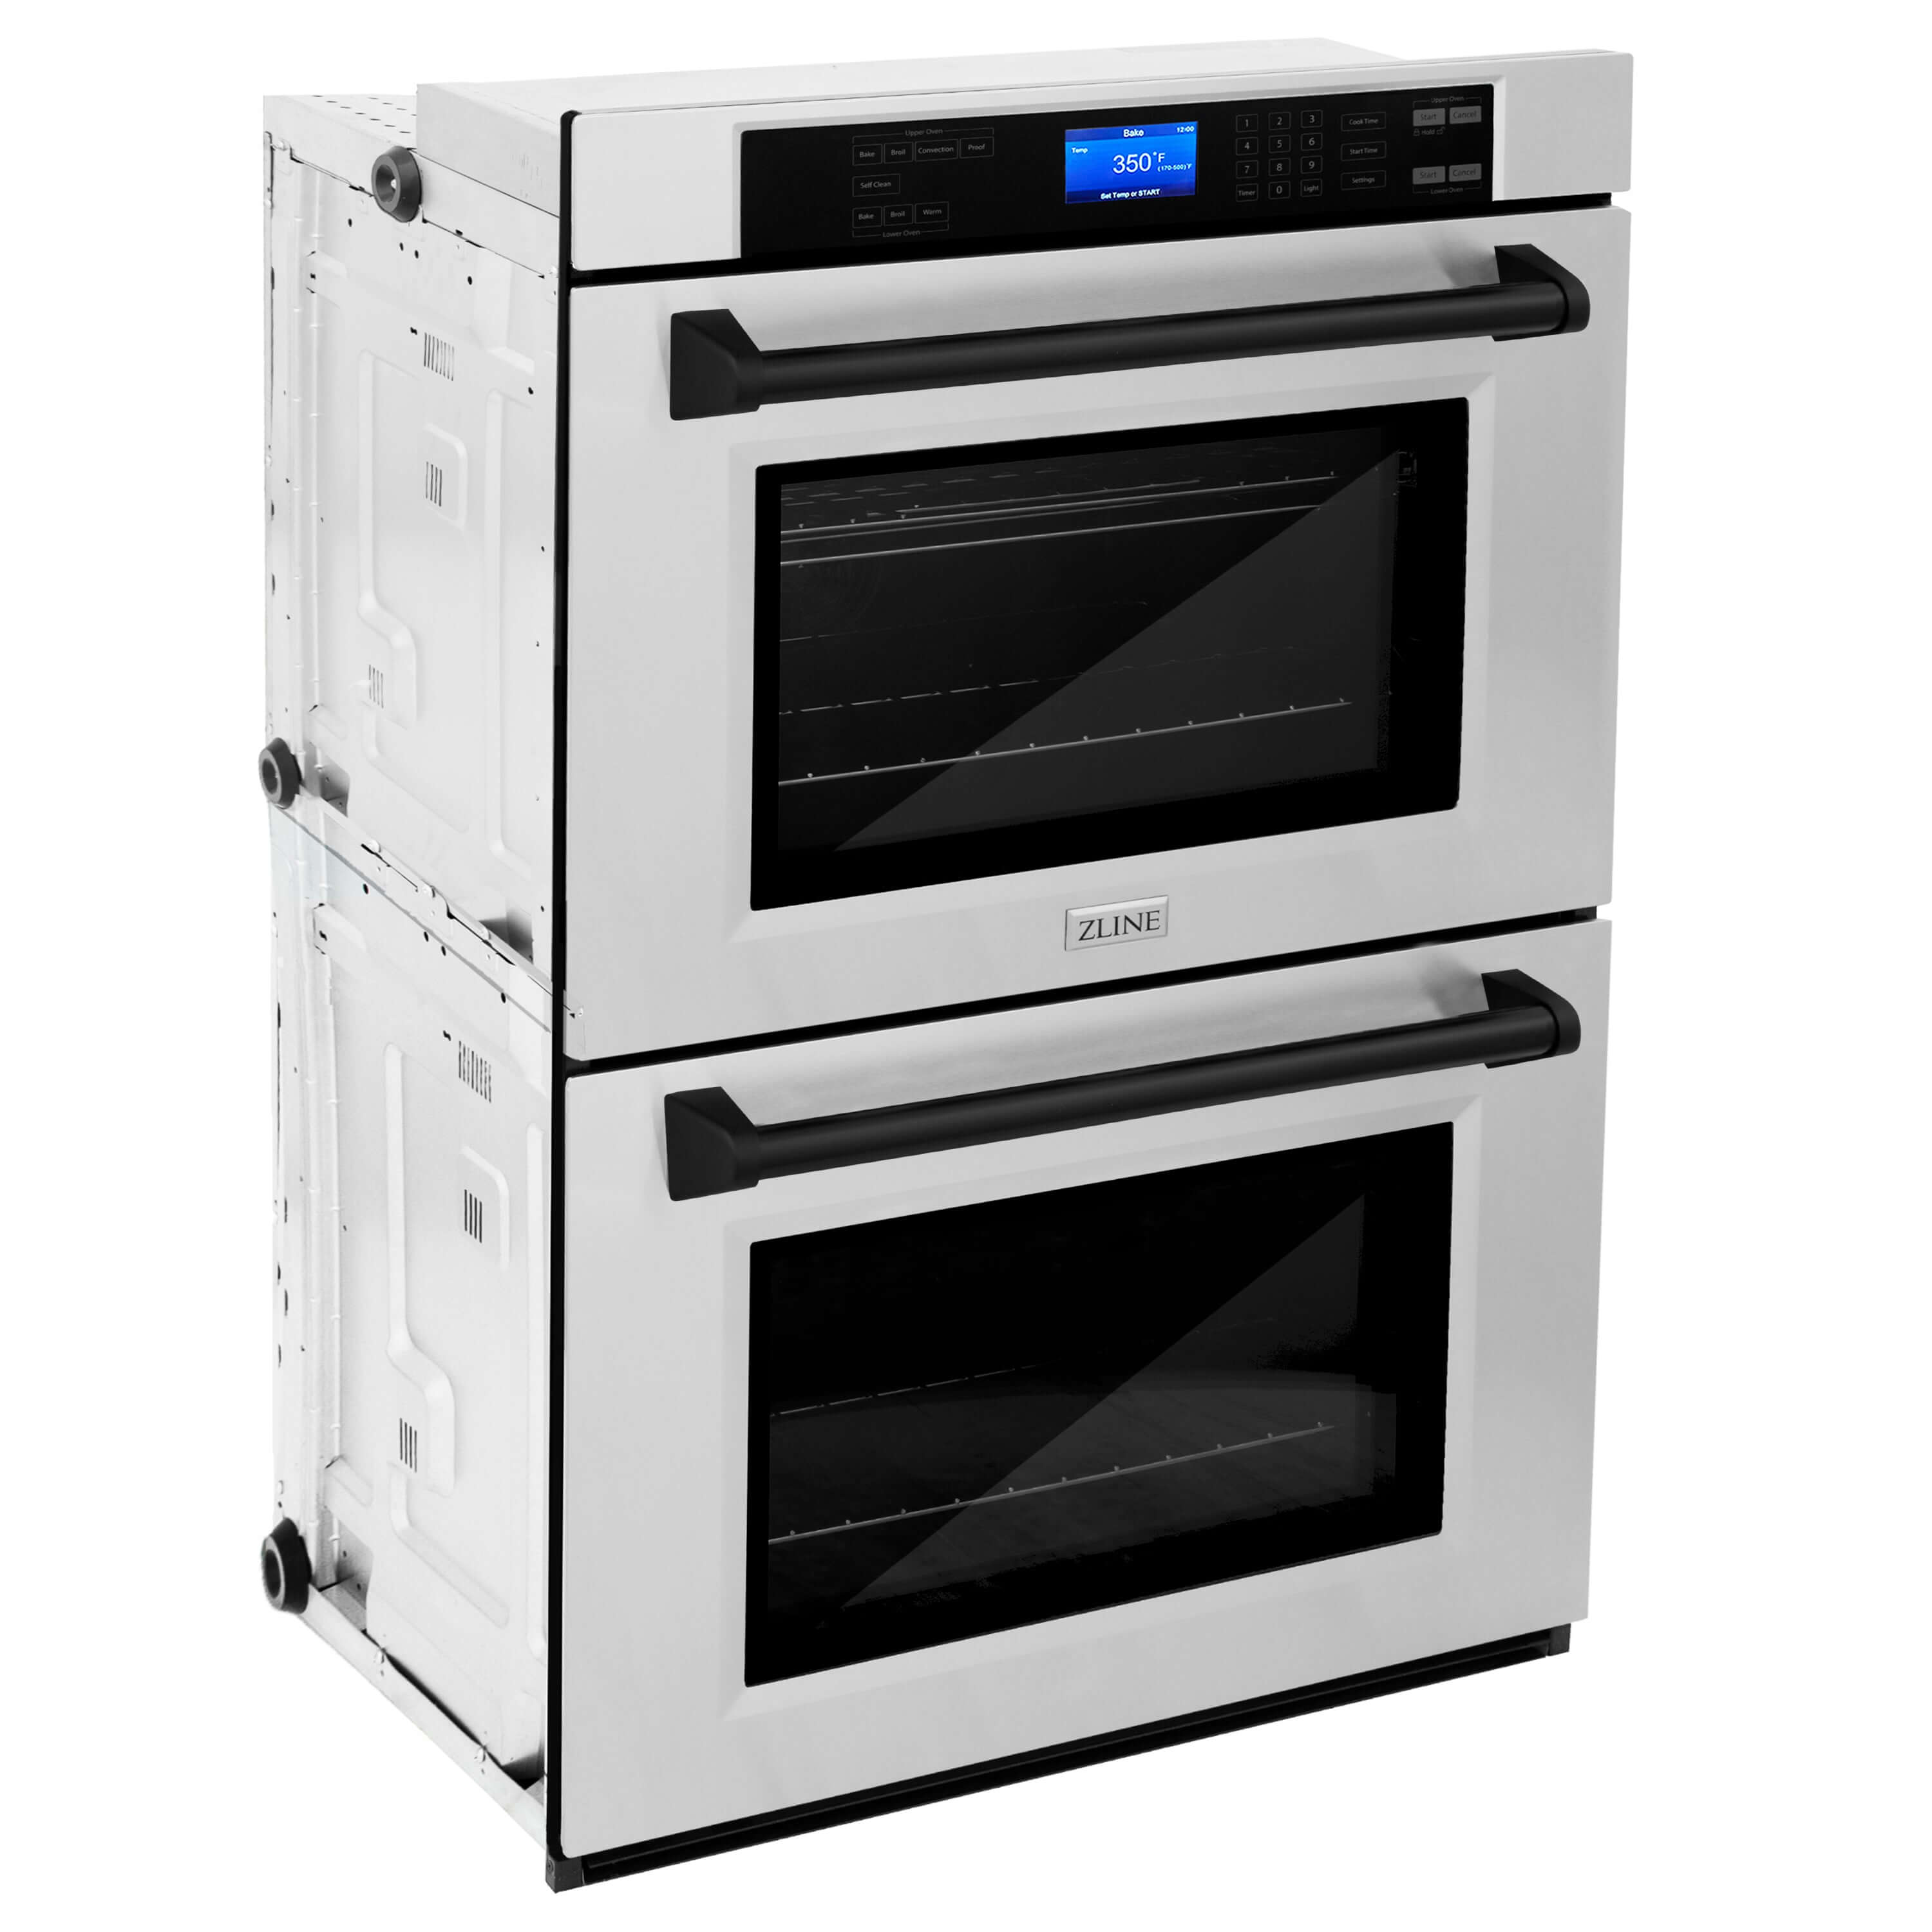 ZLINE Autograph Edition 30 in. Electric Double Wall Oven with Self Clean and True Convection in Stainless Steel and Matte Black Accents (AWDZ-30-MB) side, oven closed.